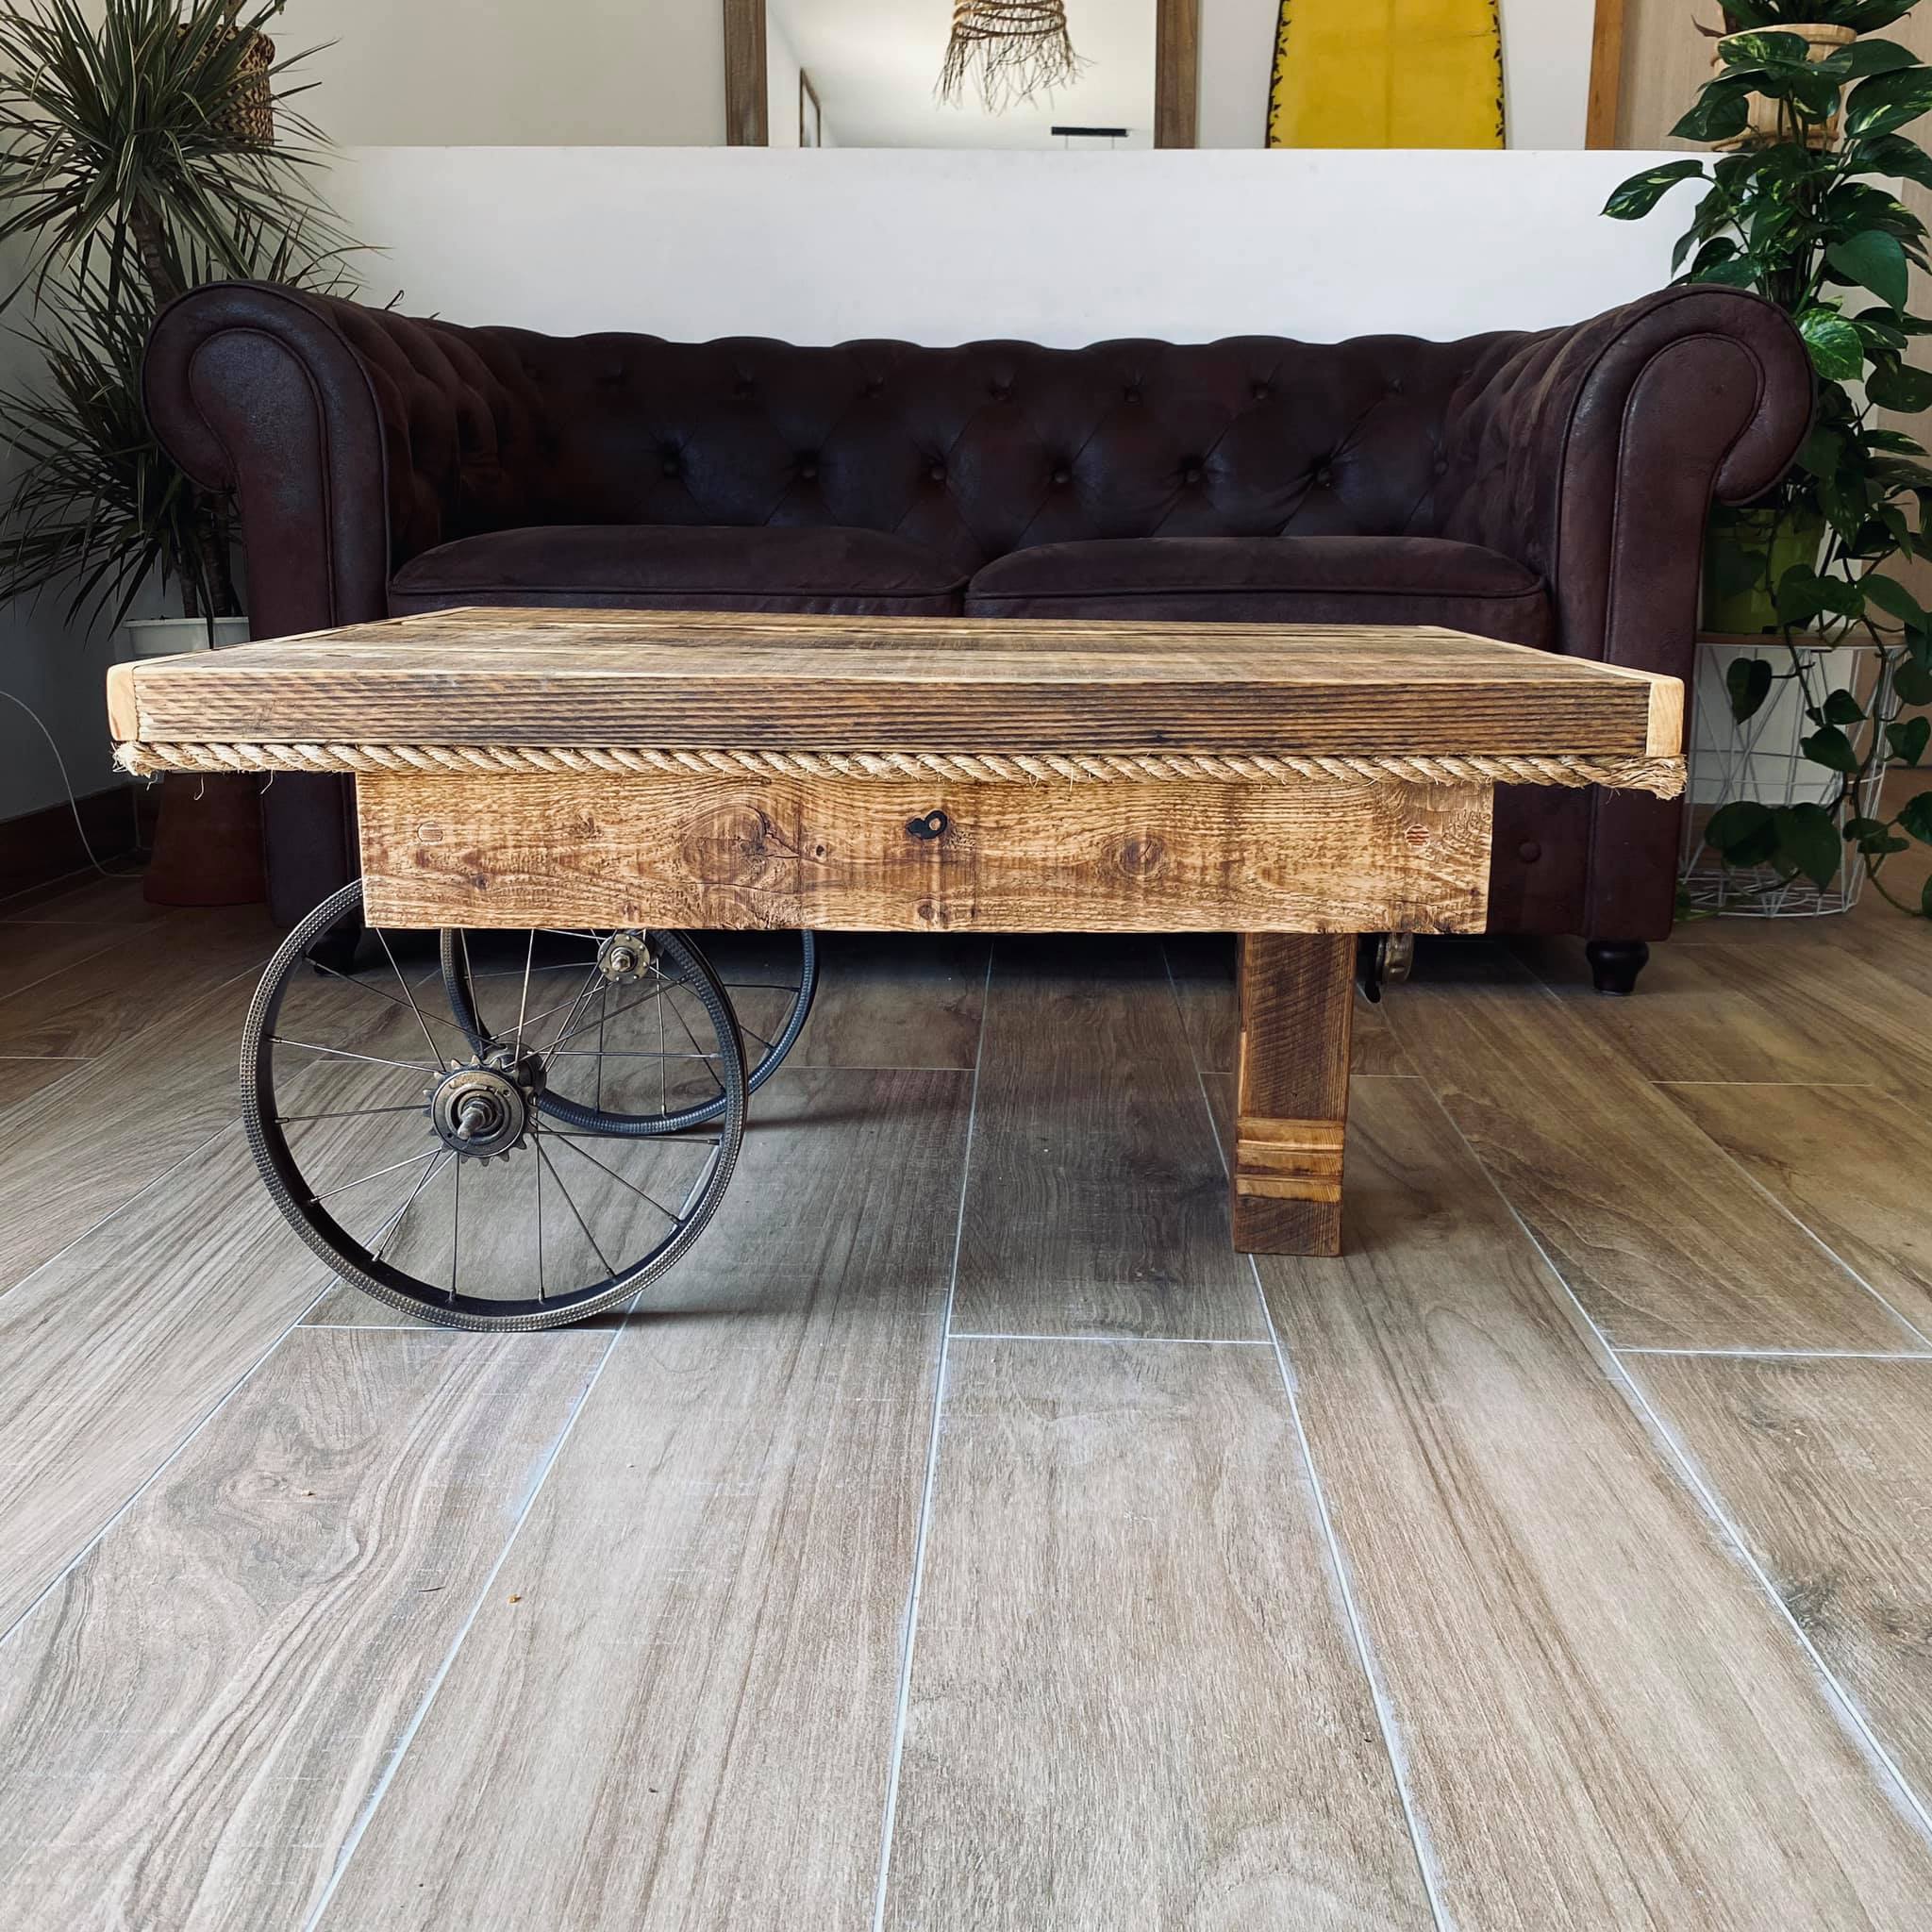 TABLE BASSE CYCLE : So woods déco